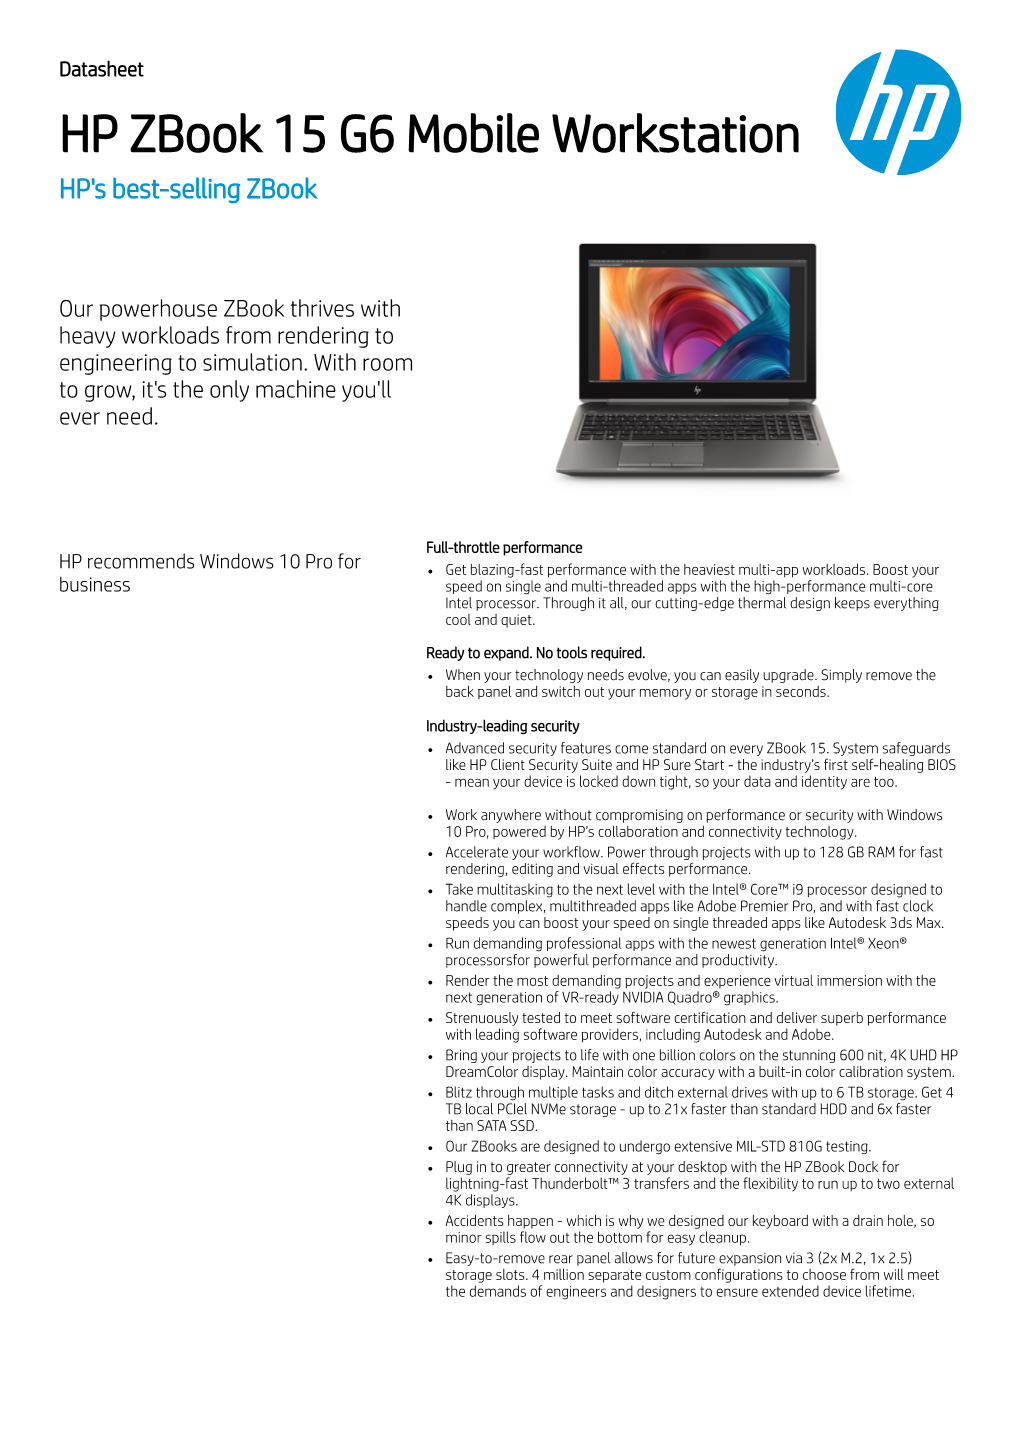 HP Zbook 15 G6 Mobile Workstation HP's Best-Selling Zbook